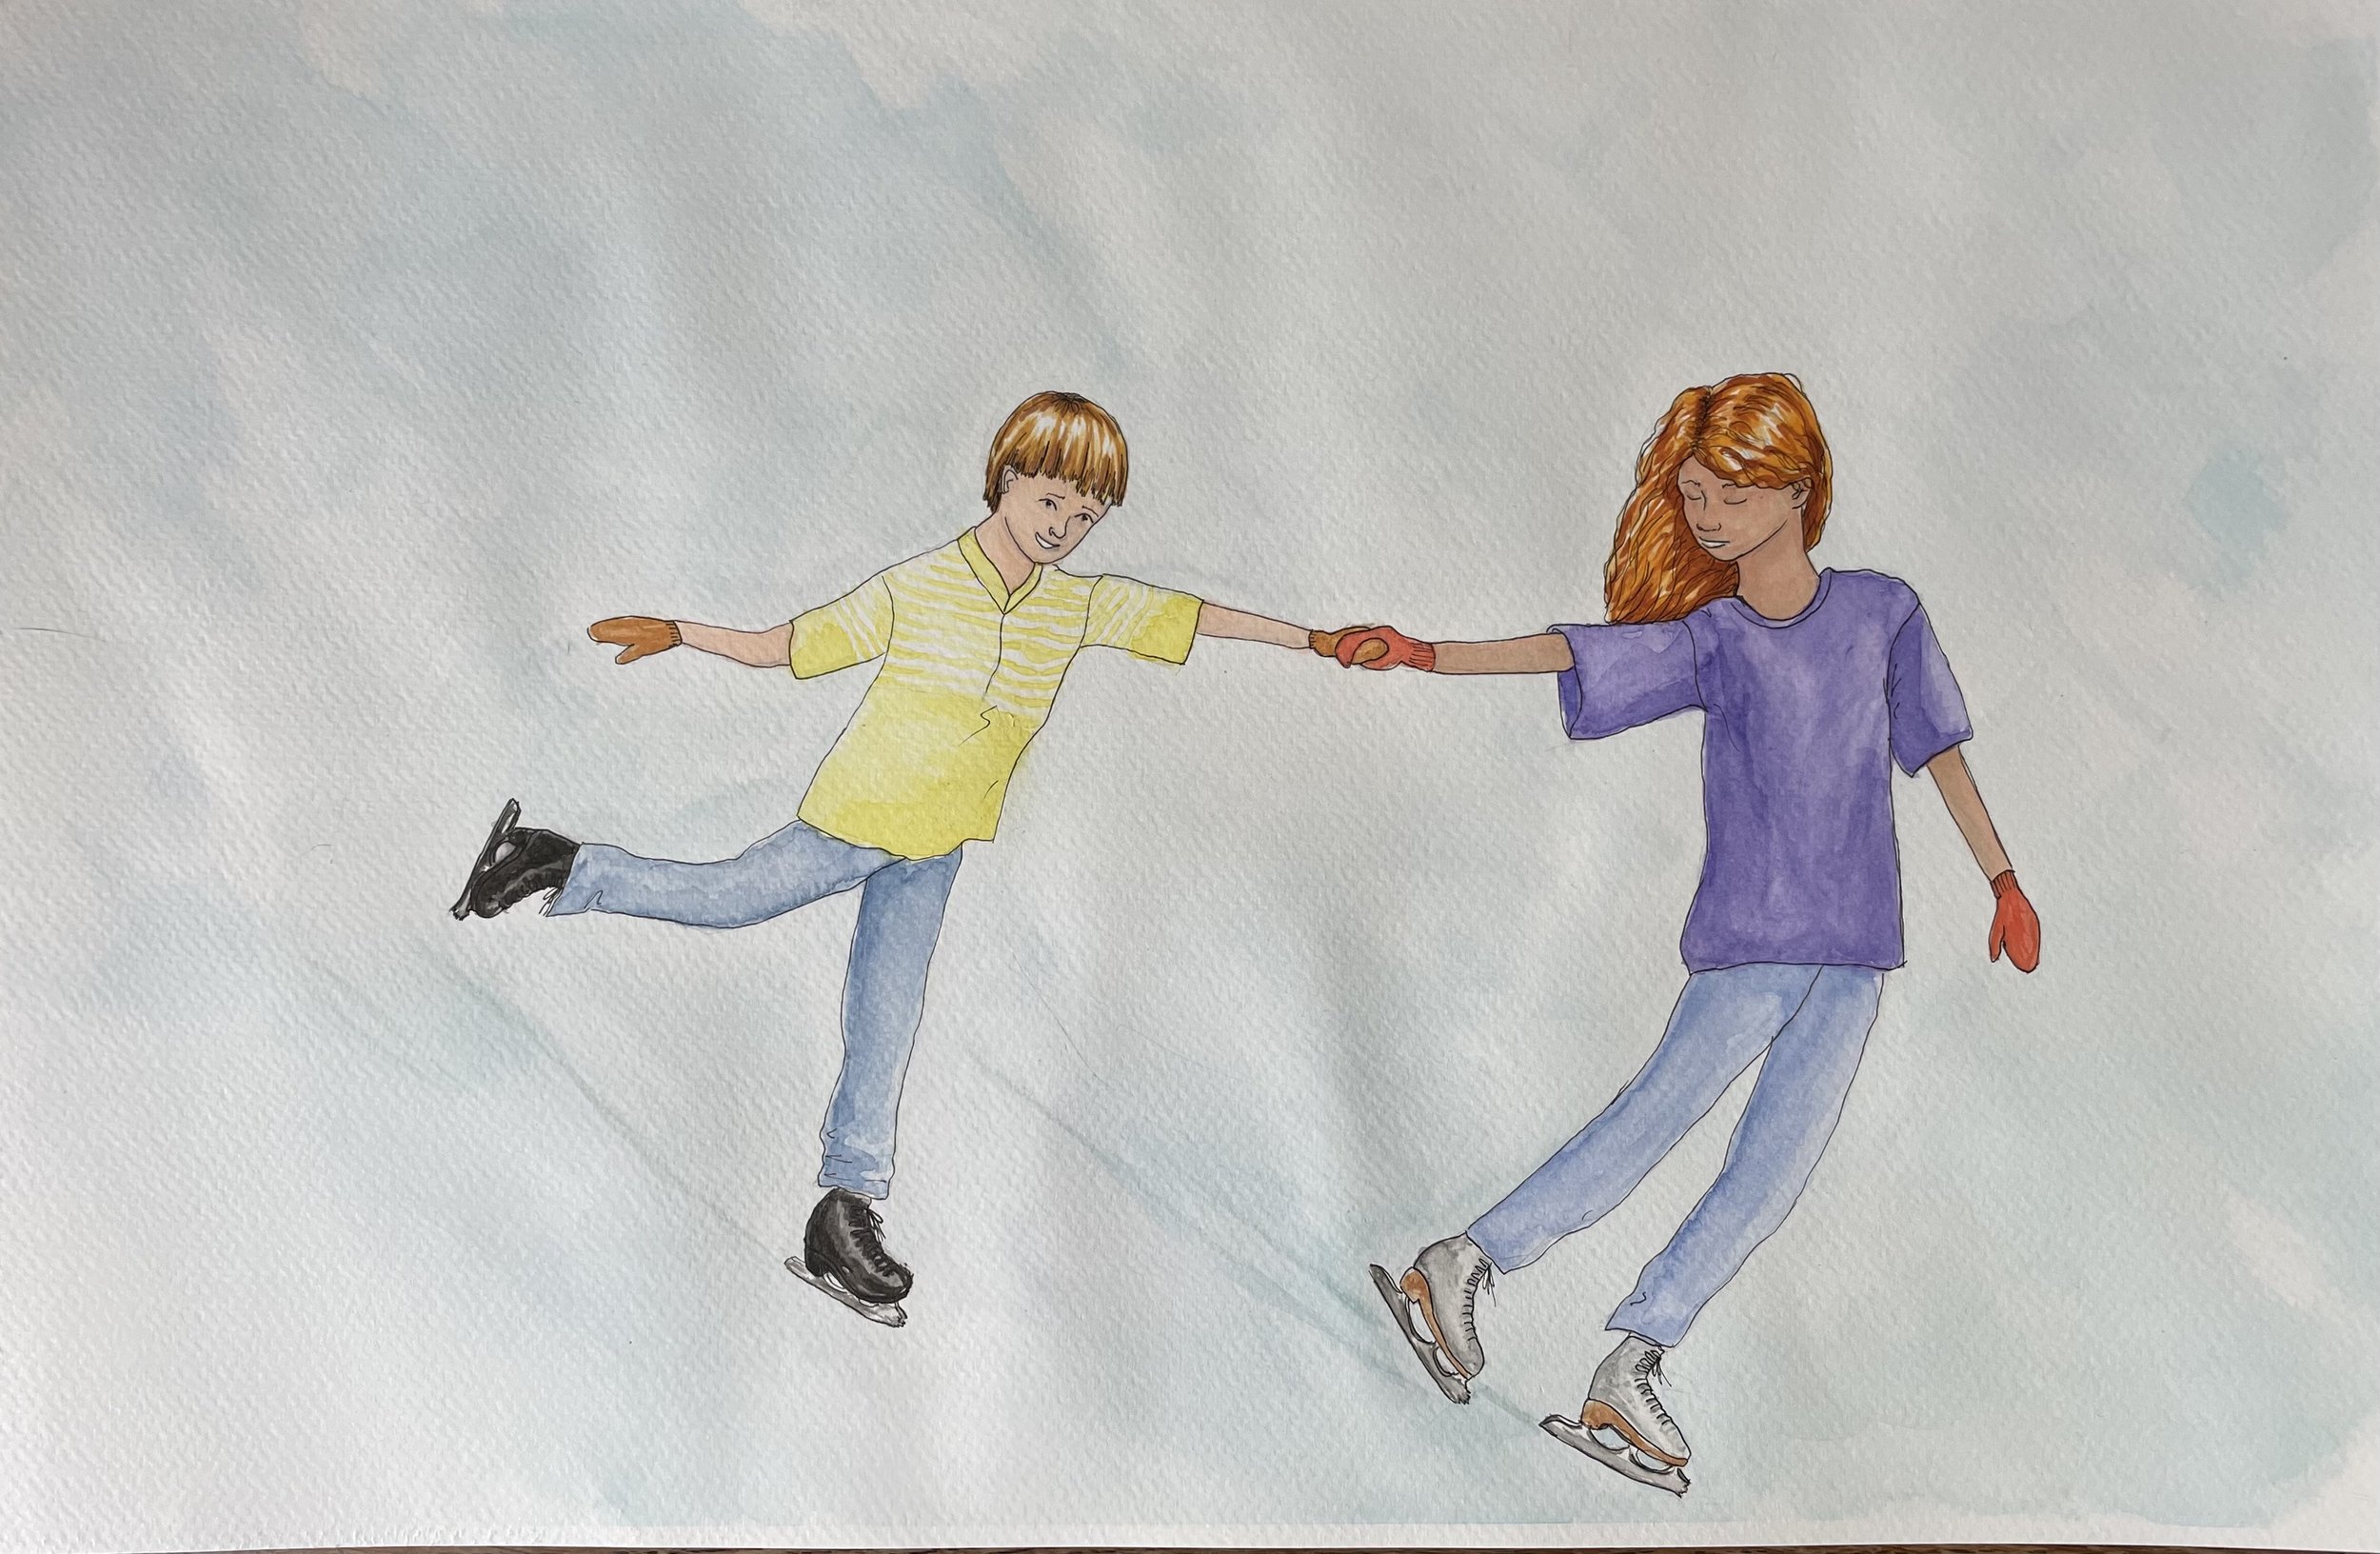 Two Ice Skaters